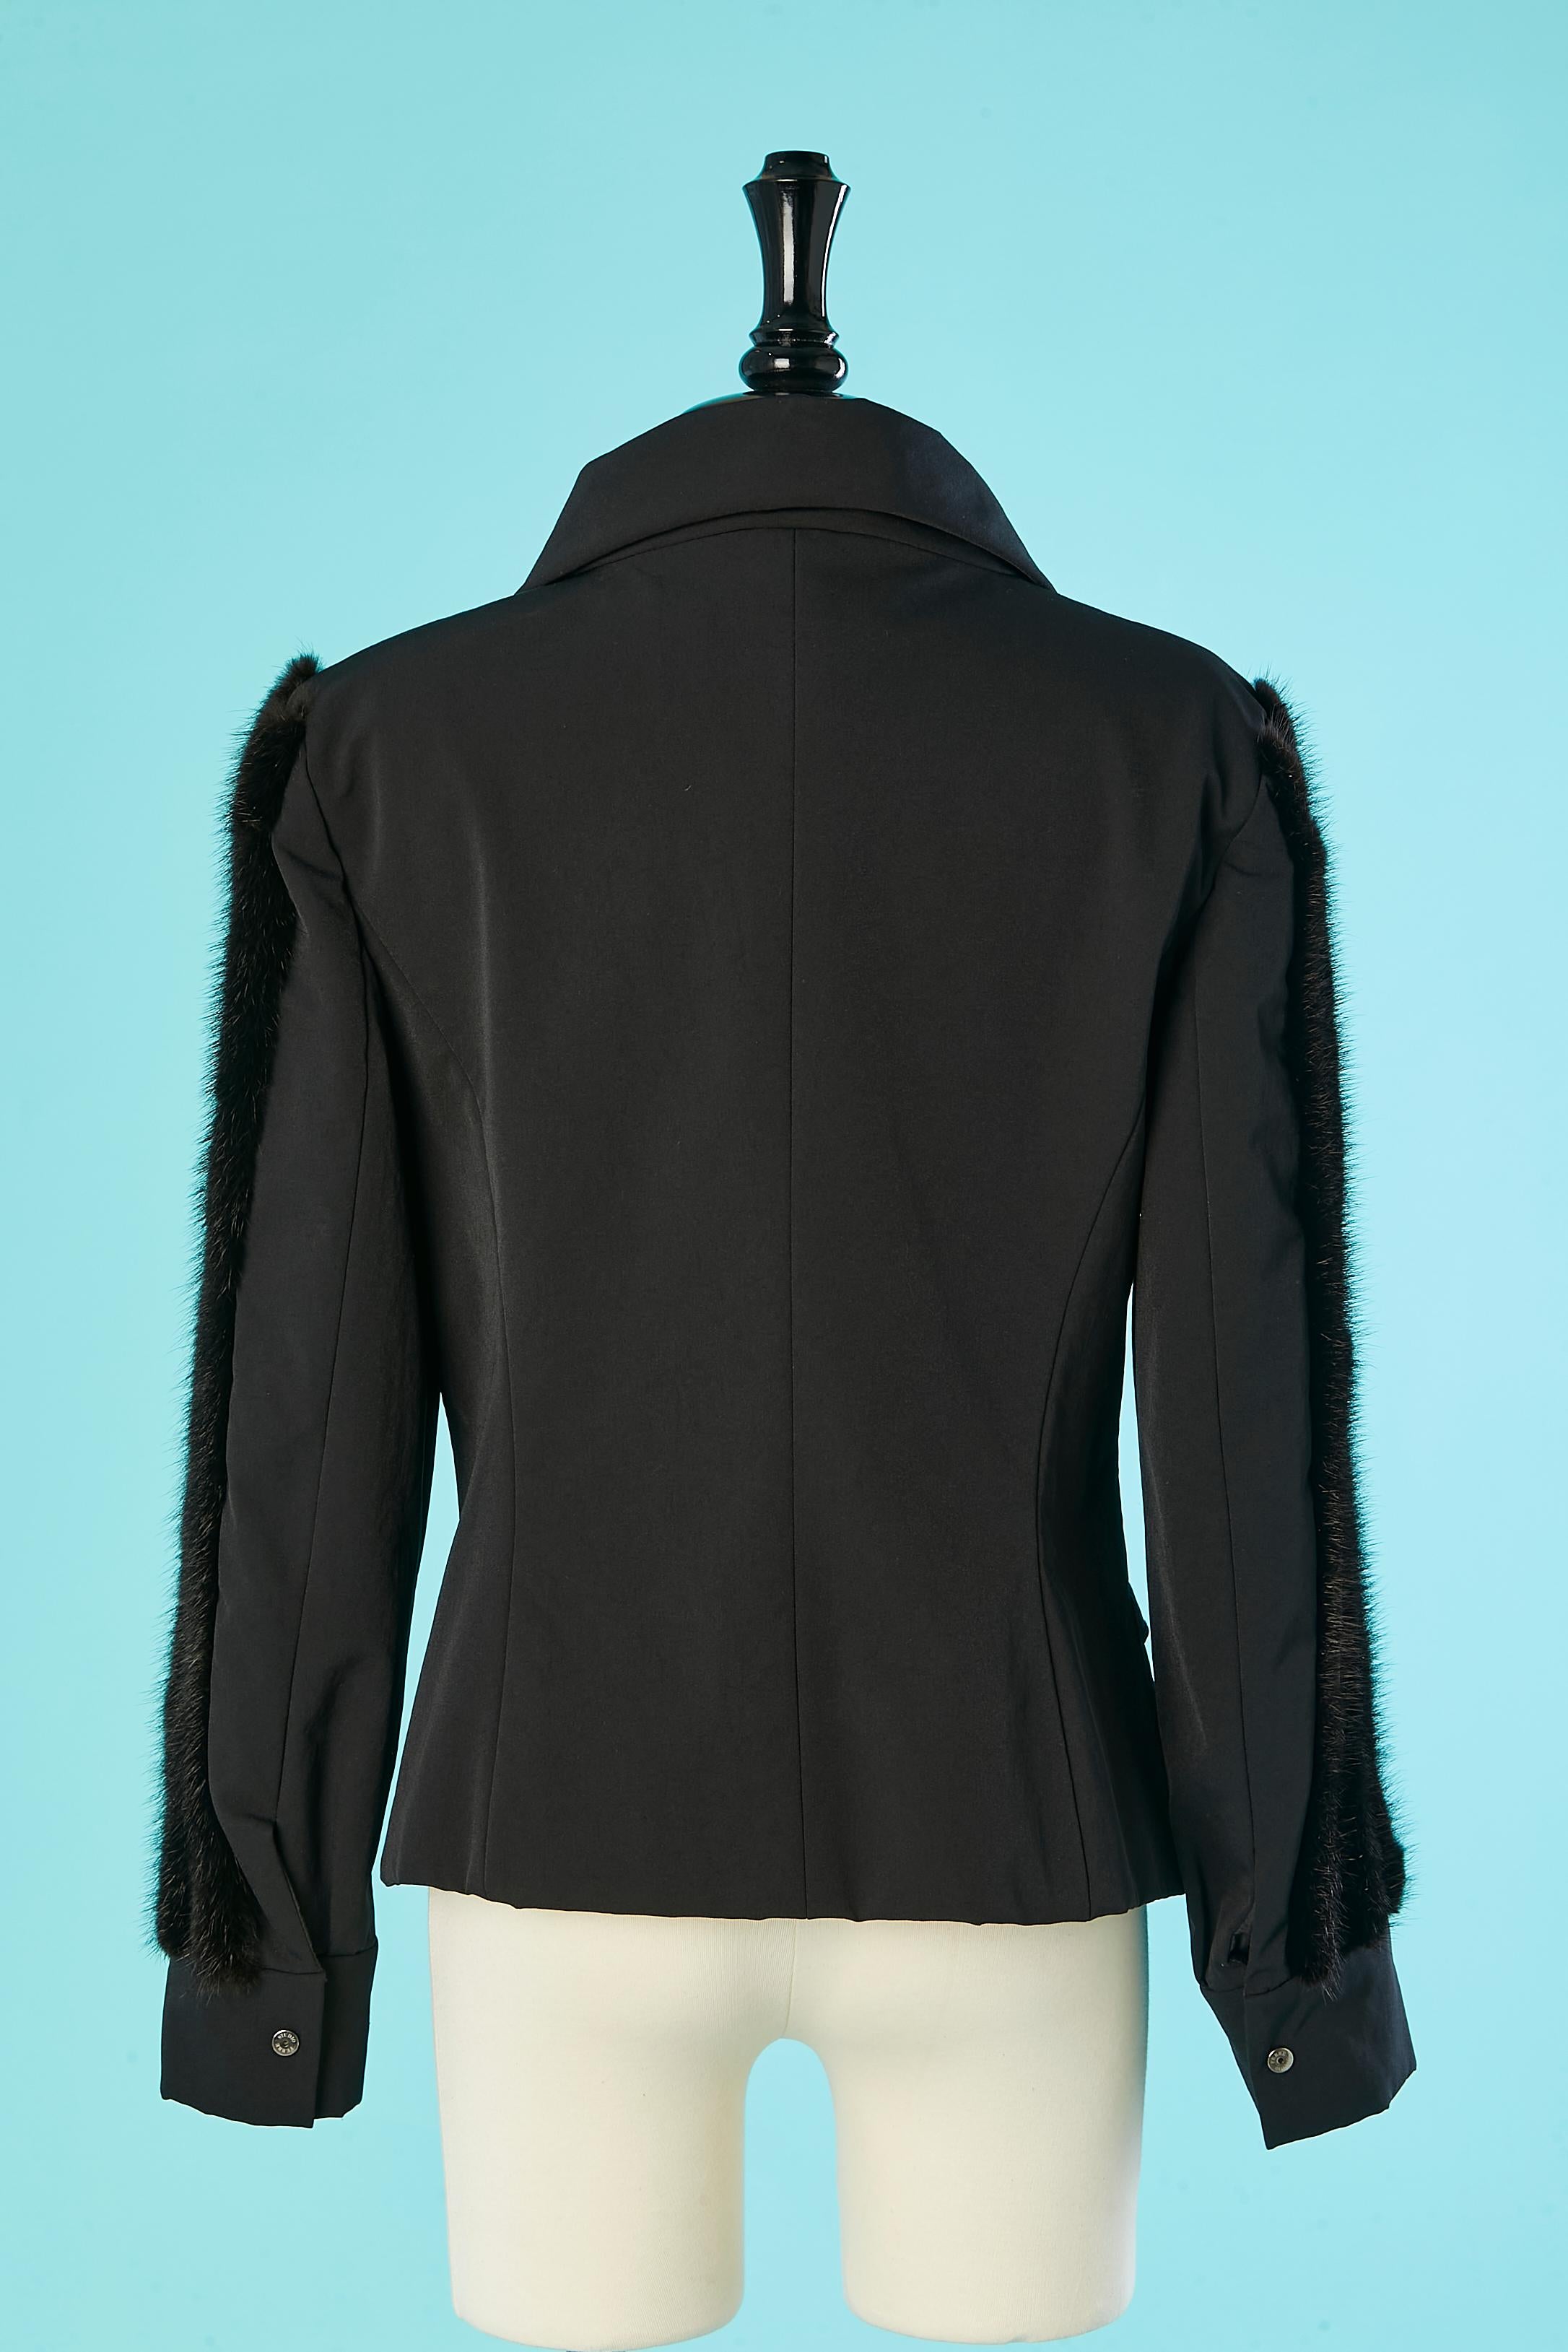 Black jacket with mink stripes on the sleeves Gianfranco Ferré Studio  For Sale 2